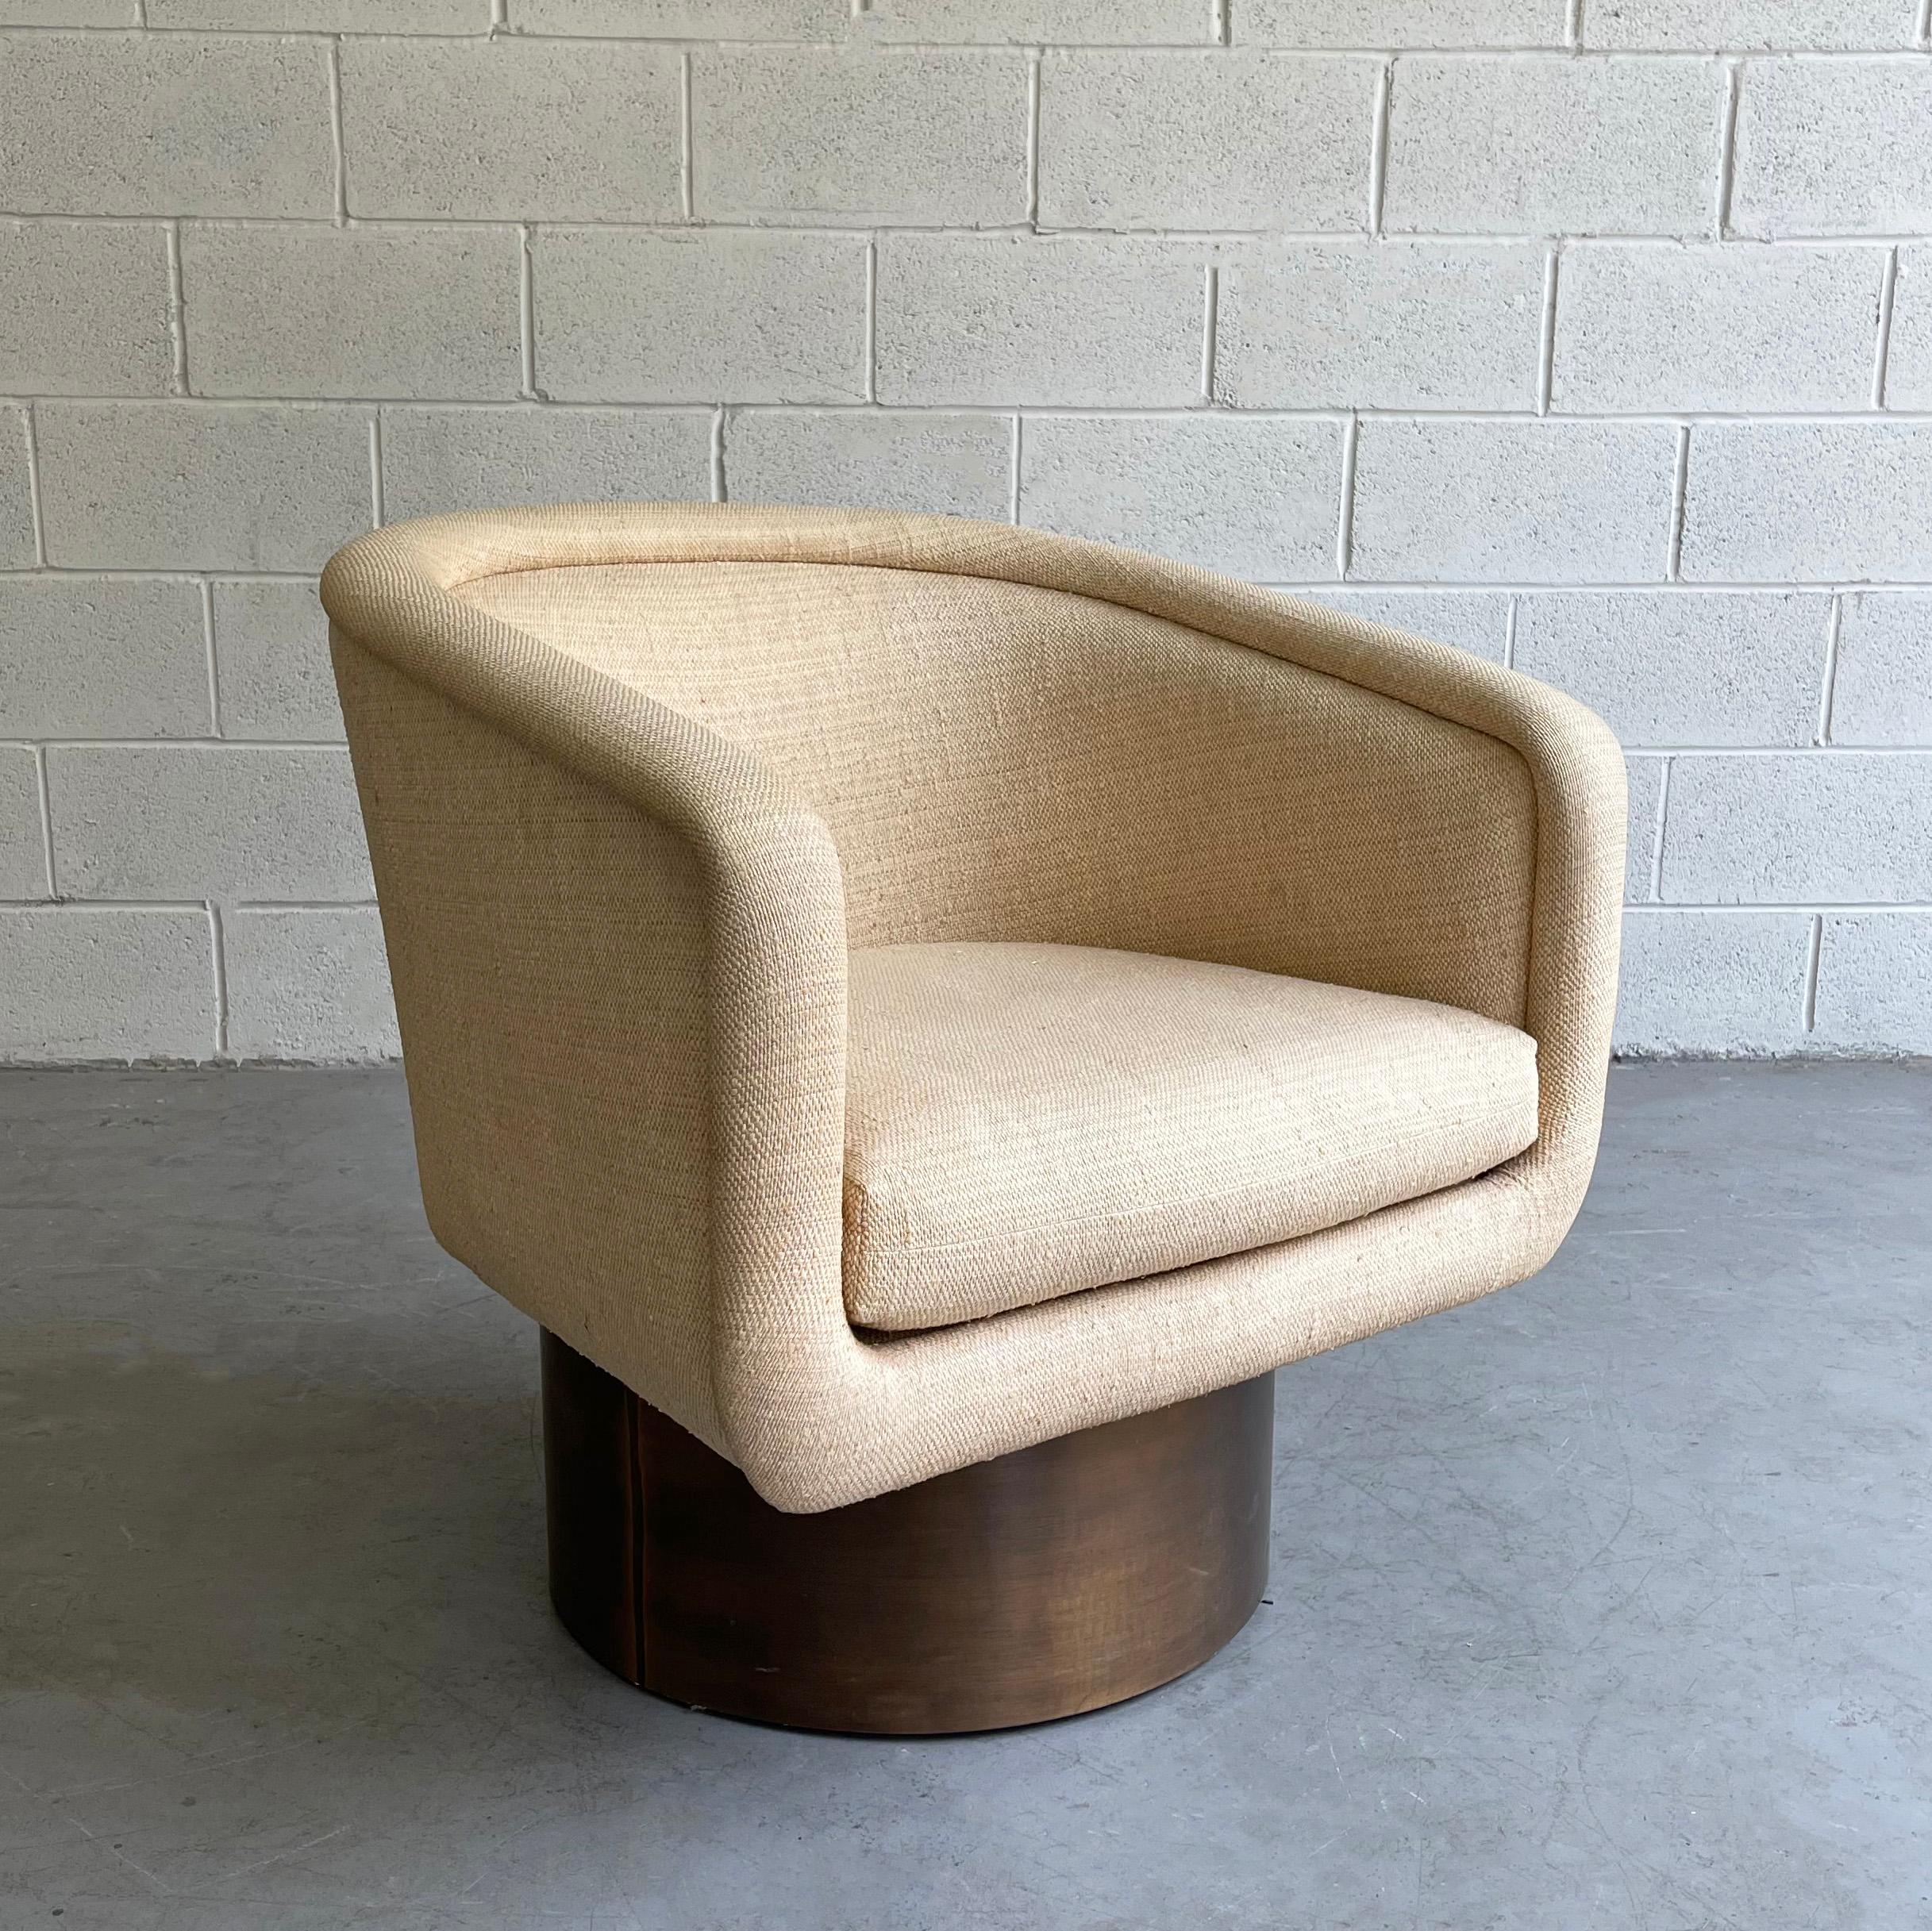 1970s, Mid-Century Modern, barrel, club chair by Leon Rosen for Pace with cream tweed upholstery swivels on a brass cylinder base.